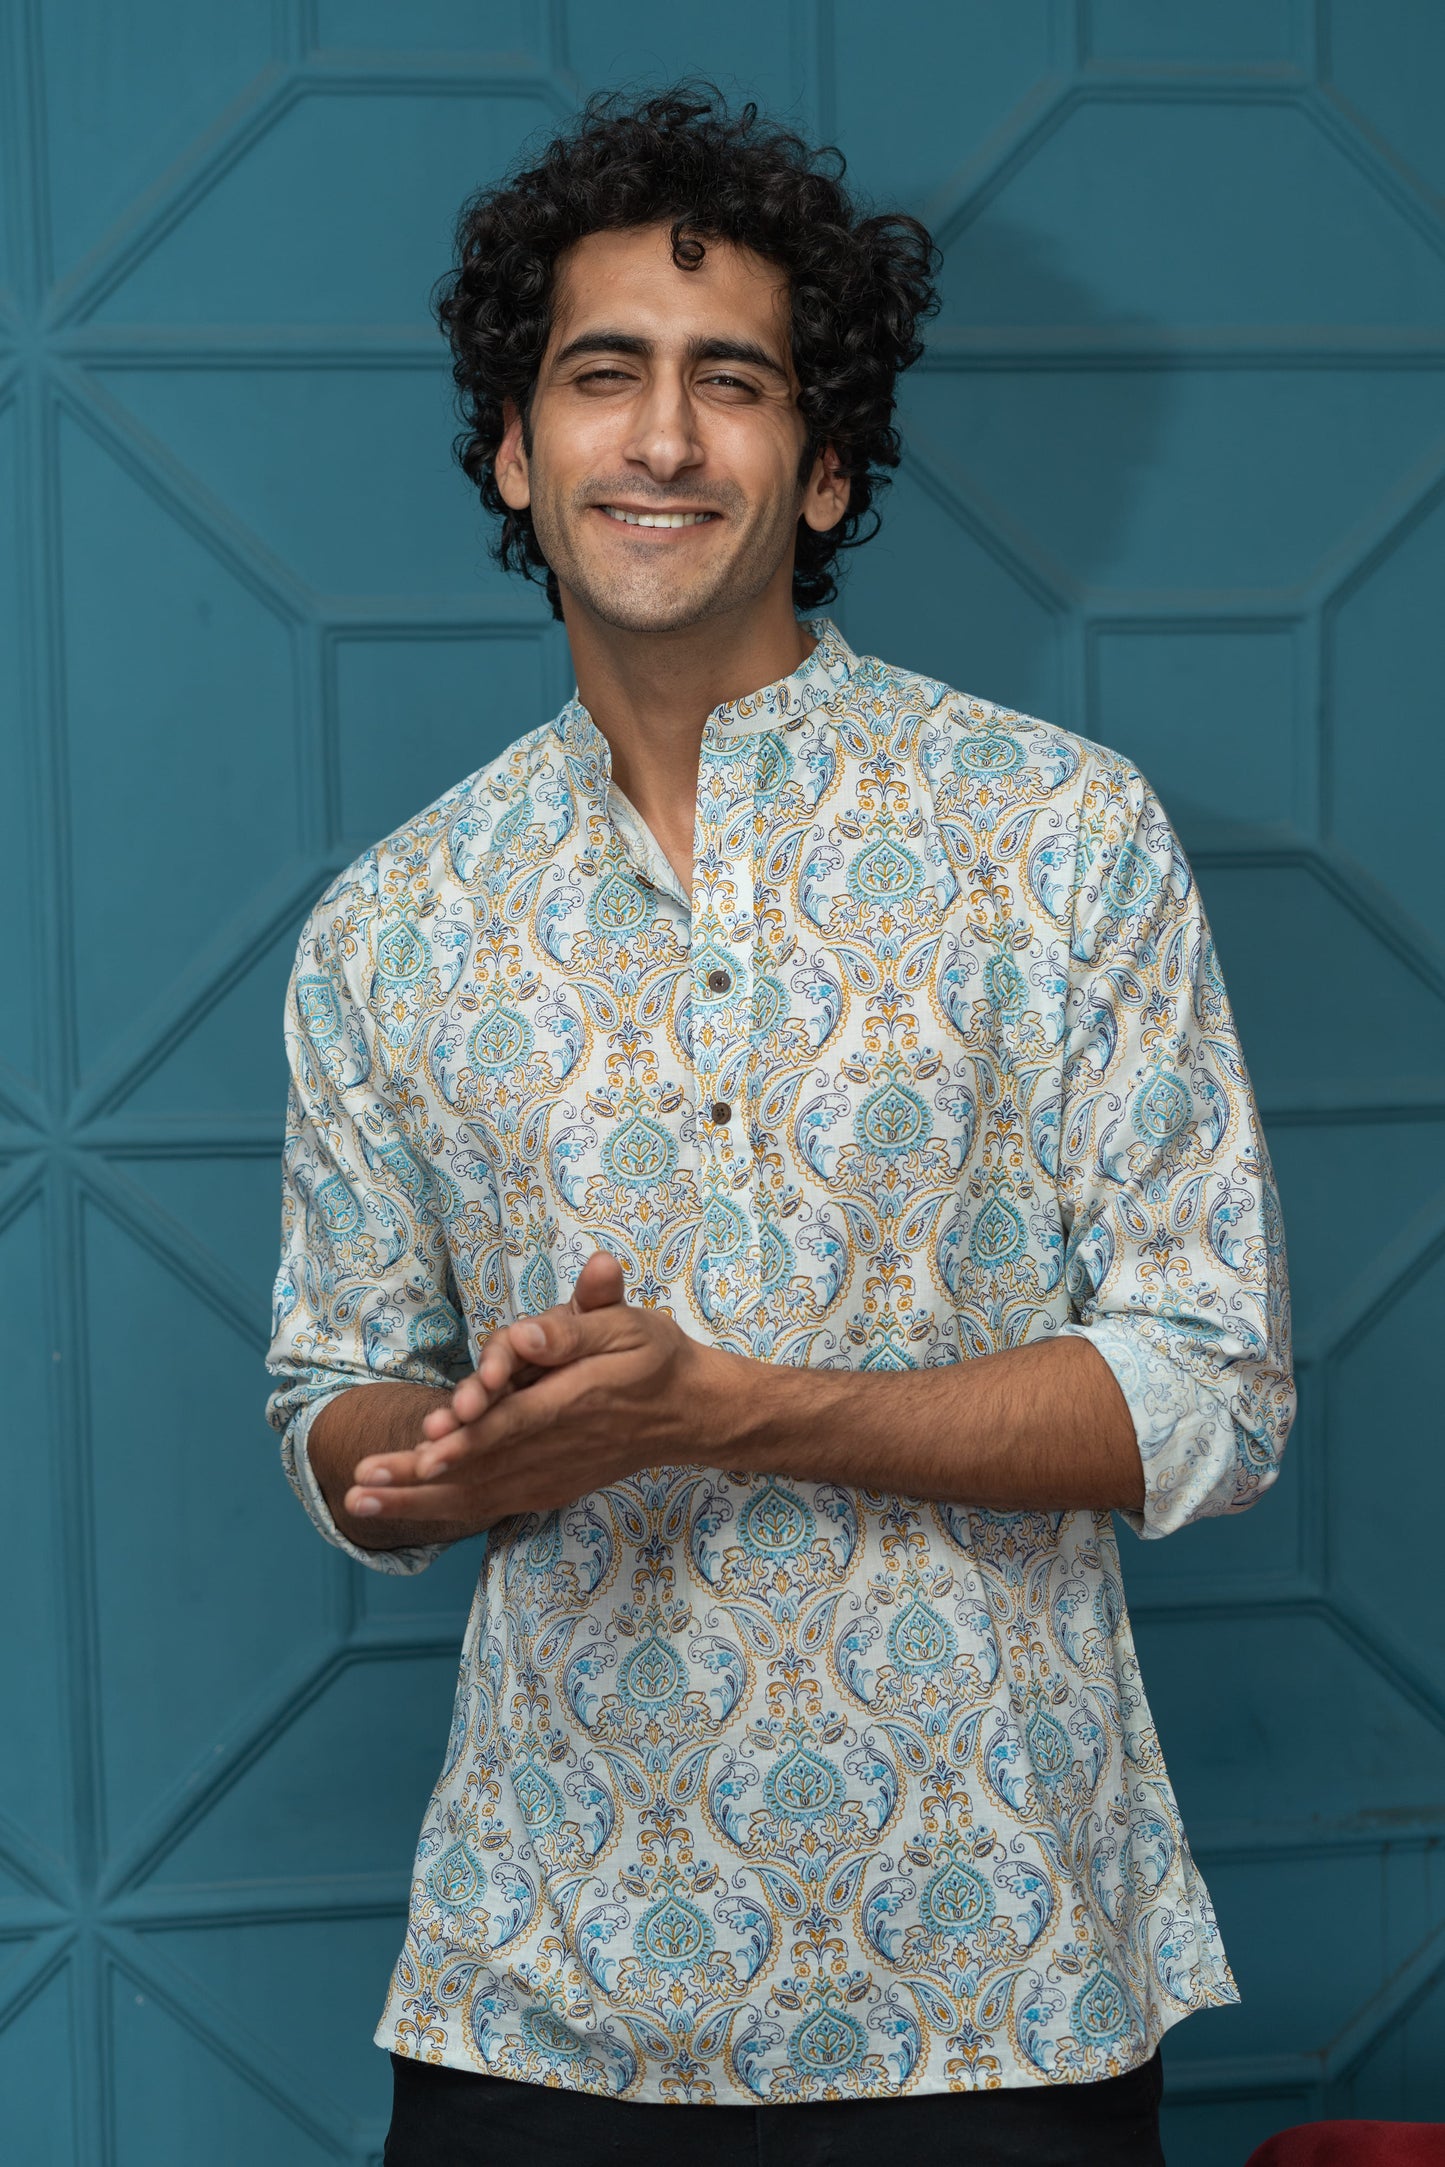 The White Short Kurta With Blue Ethnic Floral Print